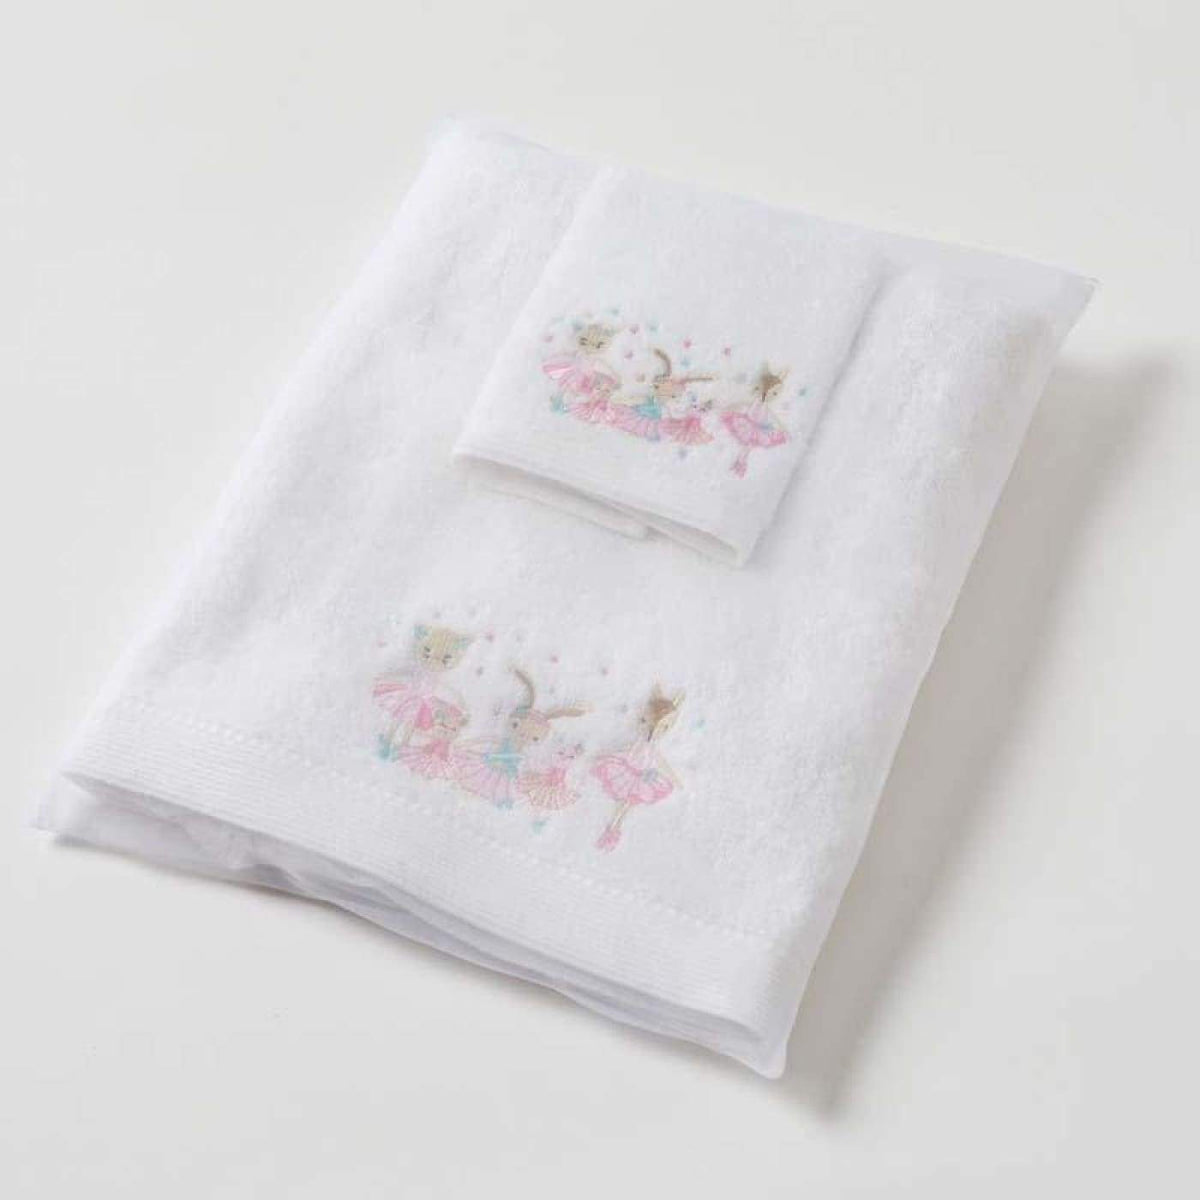 Pilbeam Towel and Face Washer in Organza Bag - Ballerina - BATHTIME &amp; CHANGING - TOWELS/WASHERS